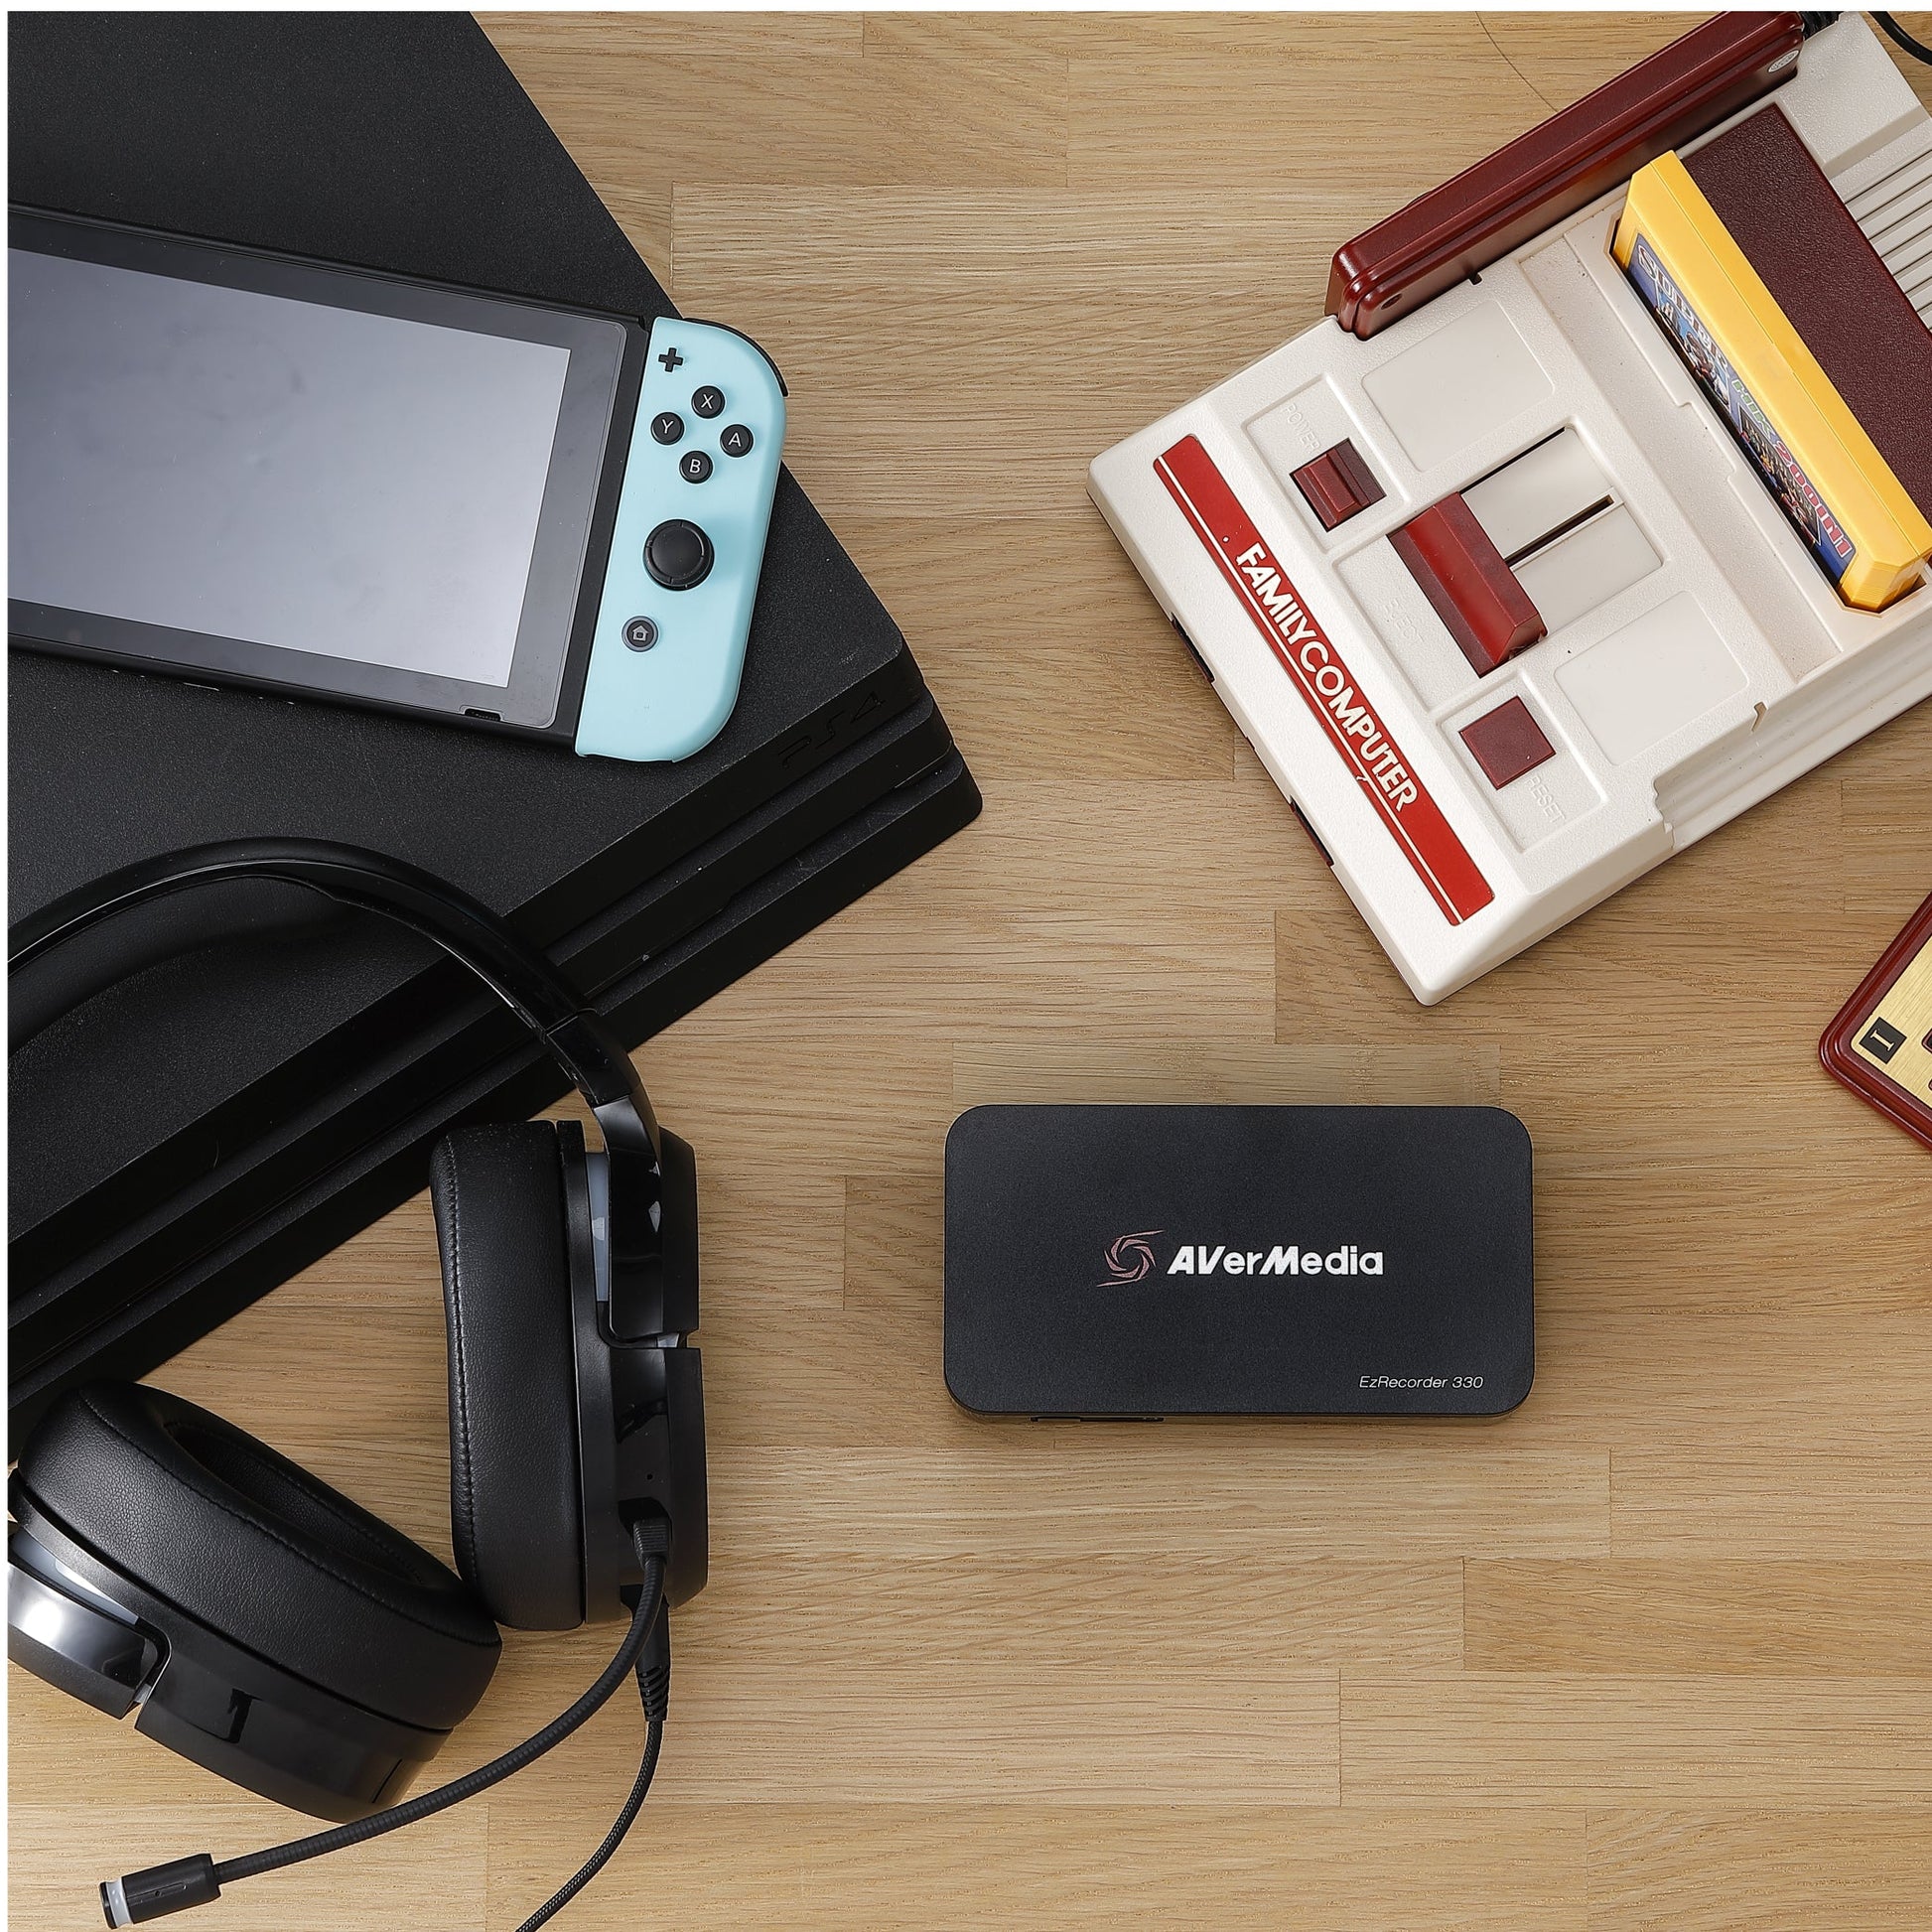 4K Pass-Through Capture Card for Streaming with game consoles